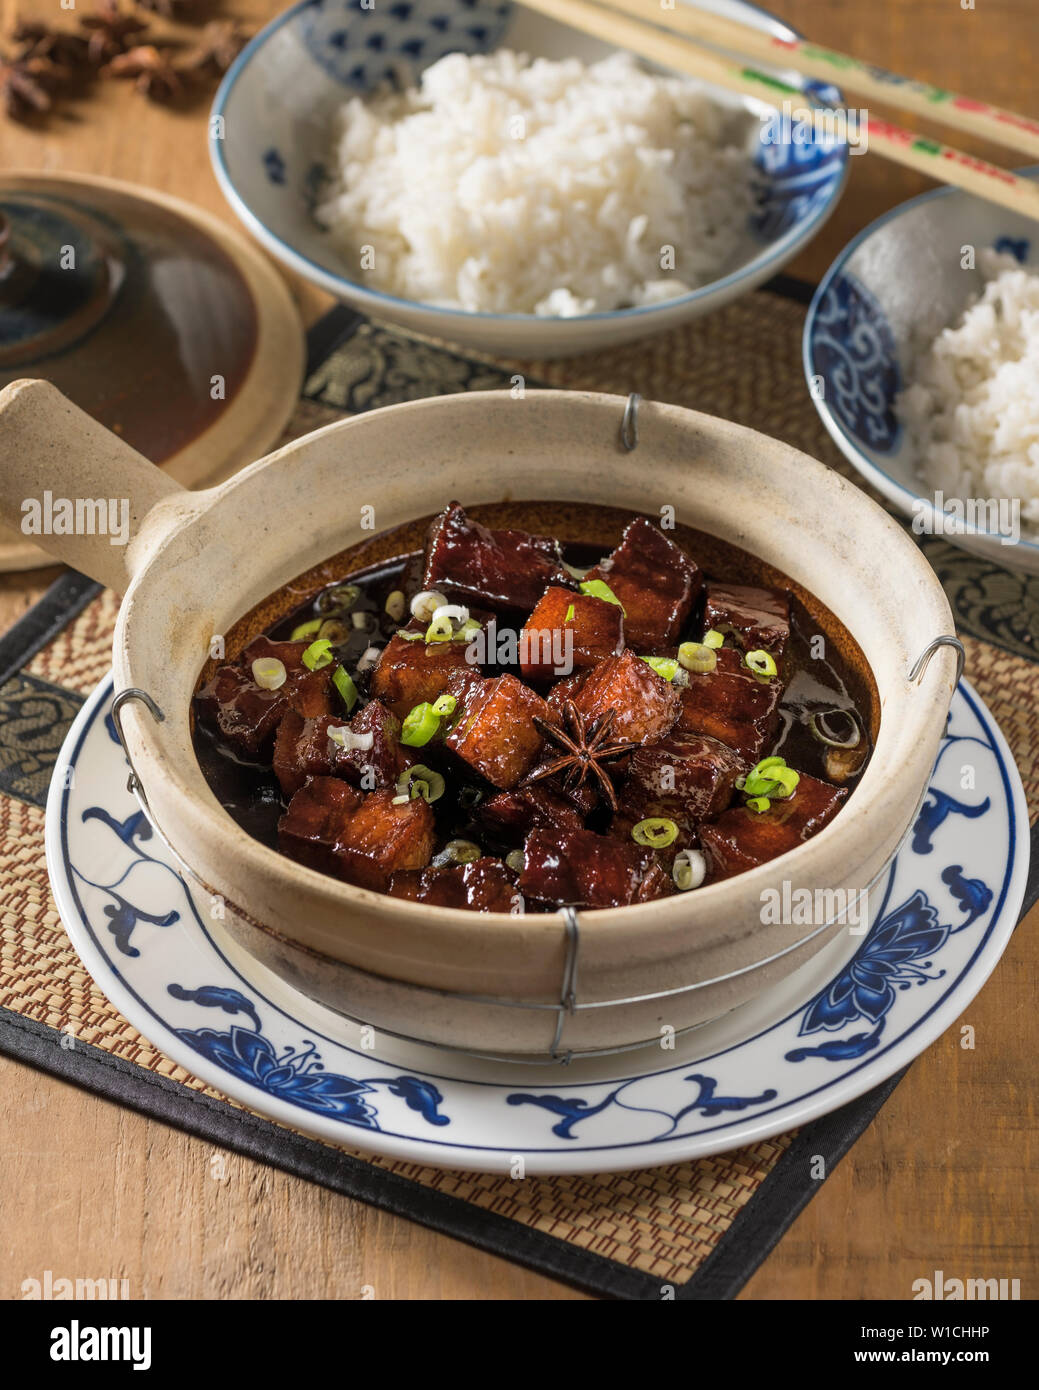 Hung shao pork. Shanghai style braised pork belly. Chinese food Stock Photo